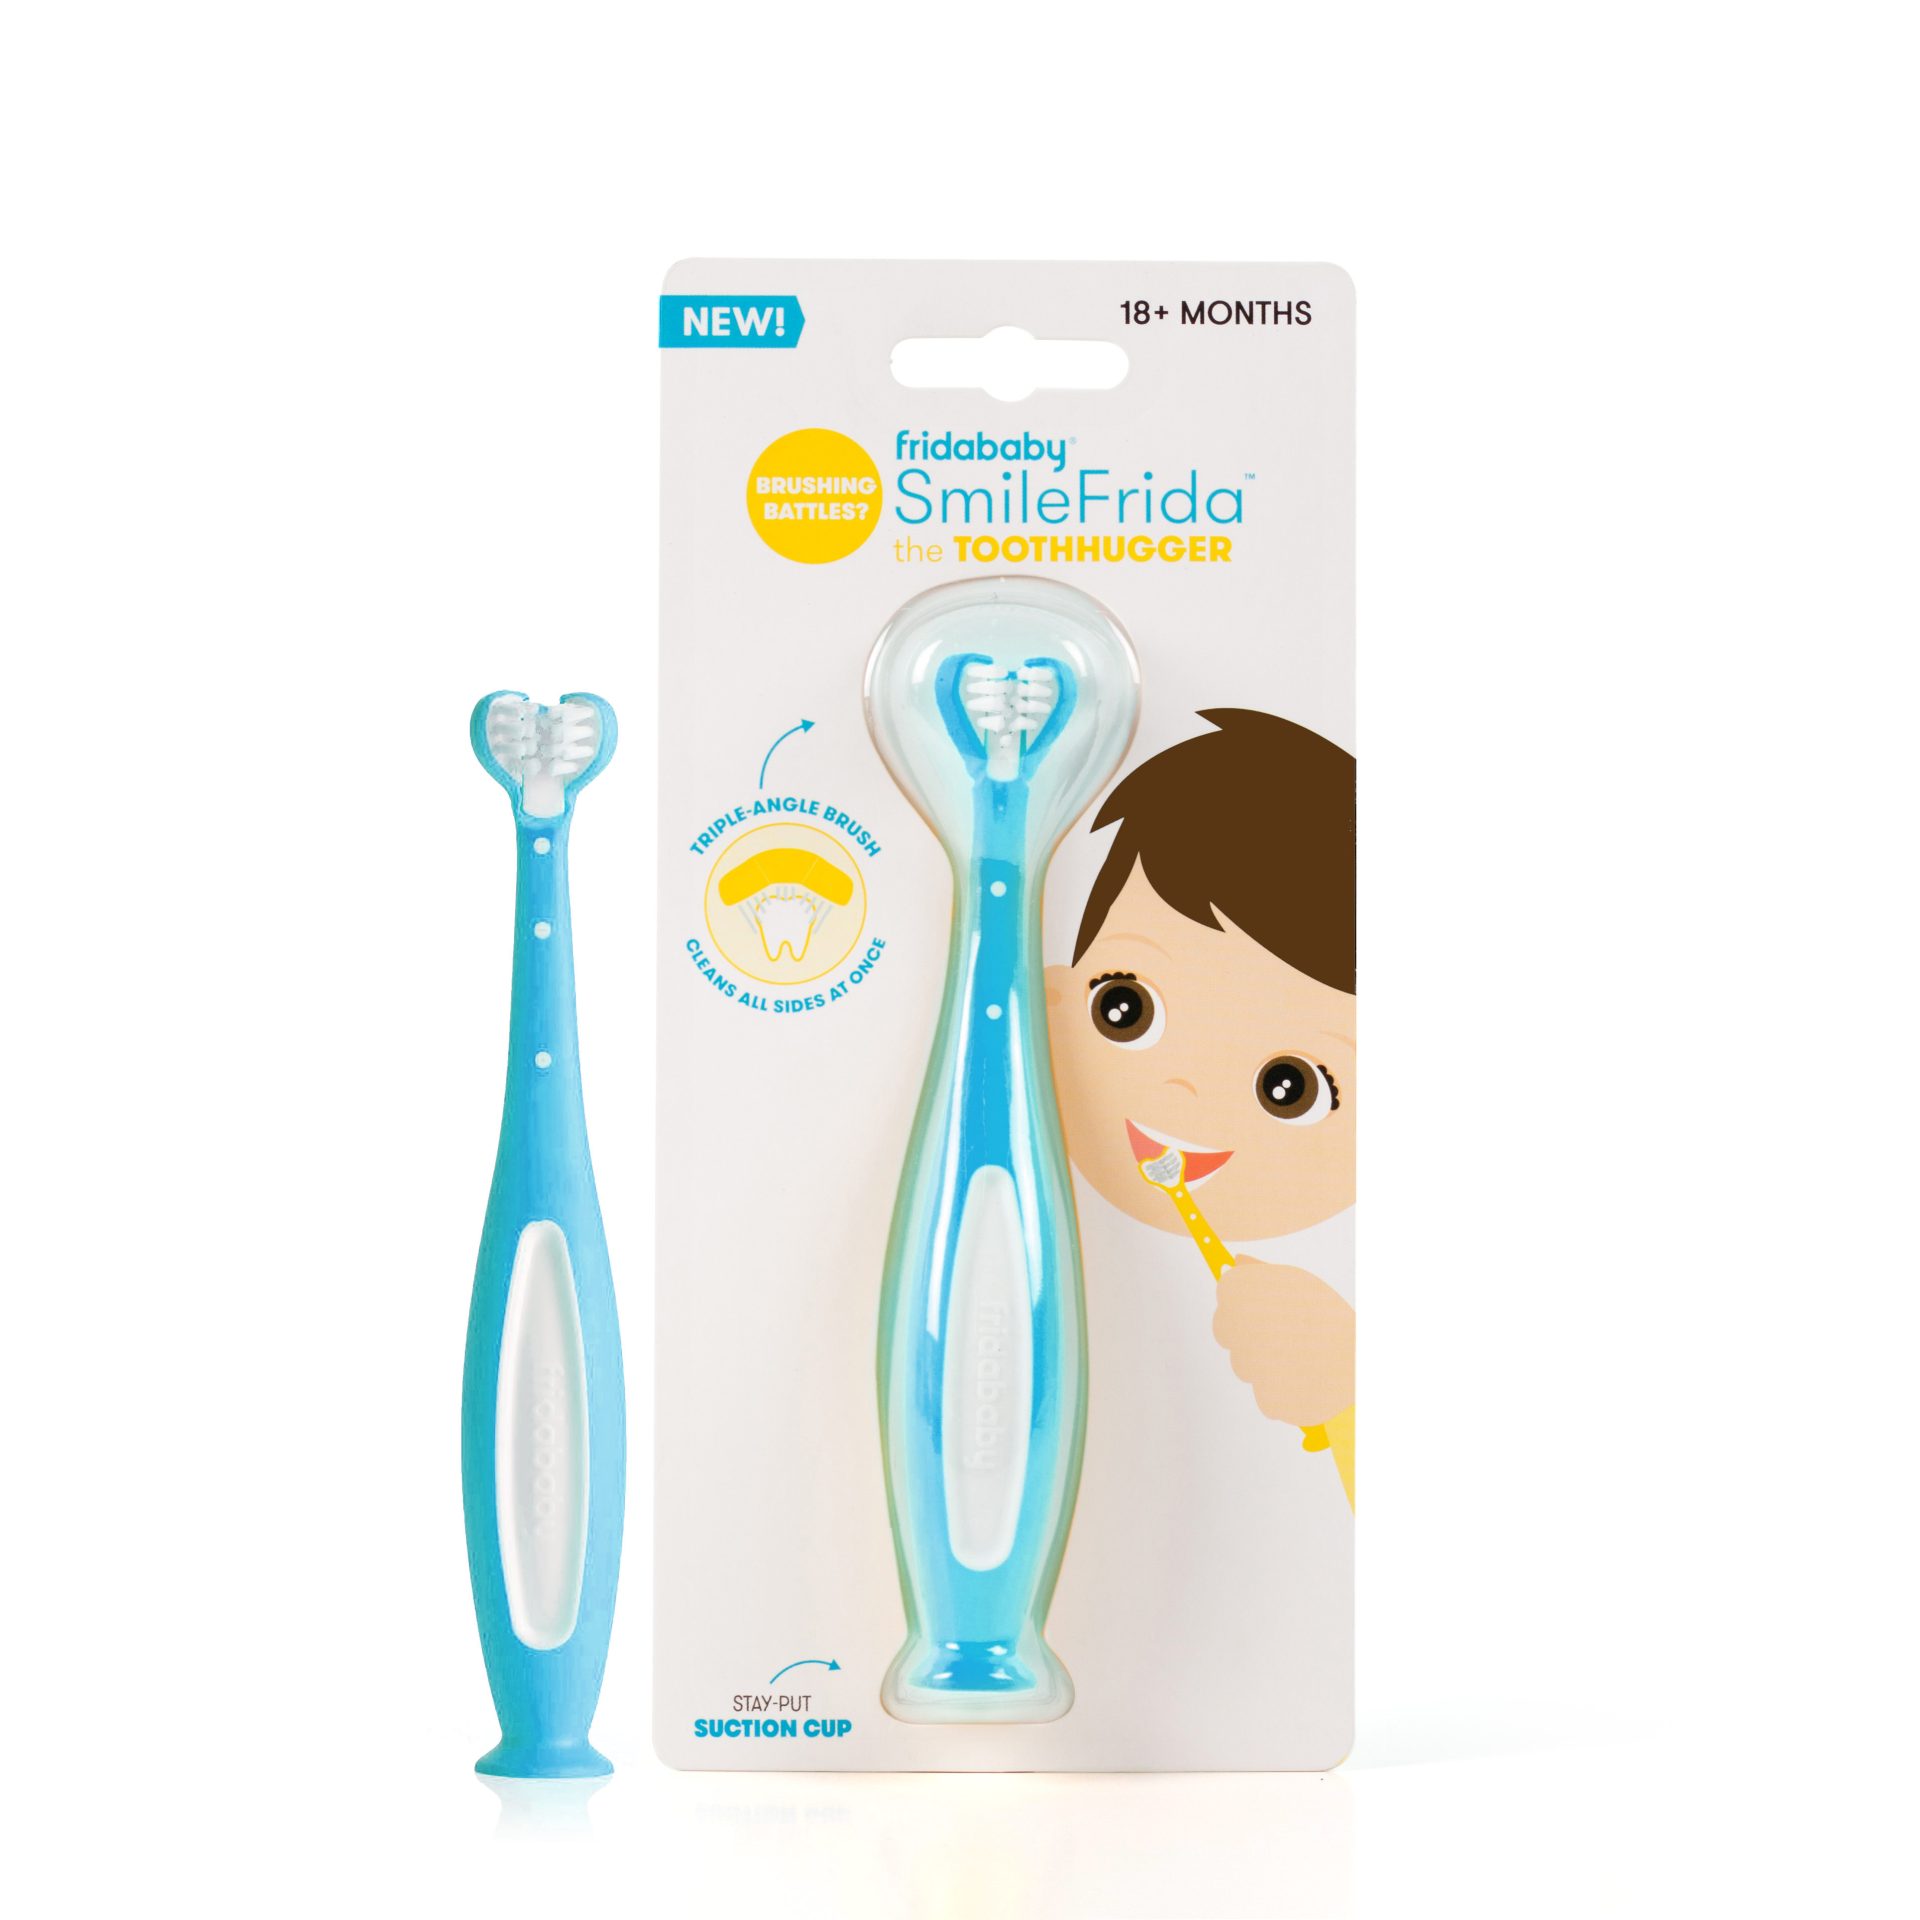 Baby Toothbrush: The Finger Toothbrush